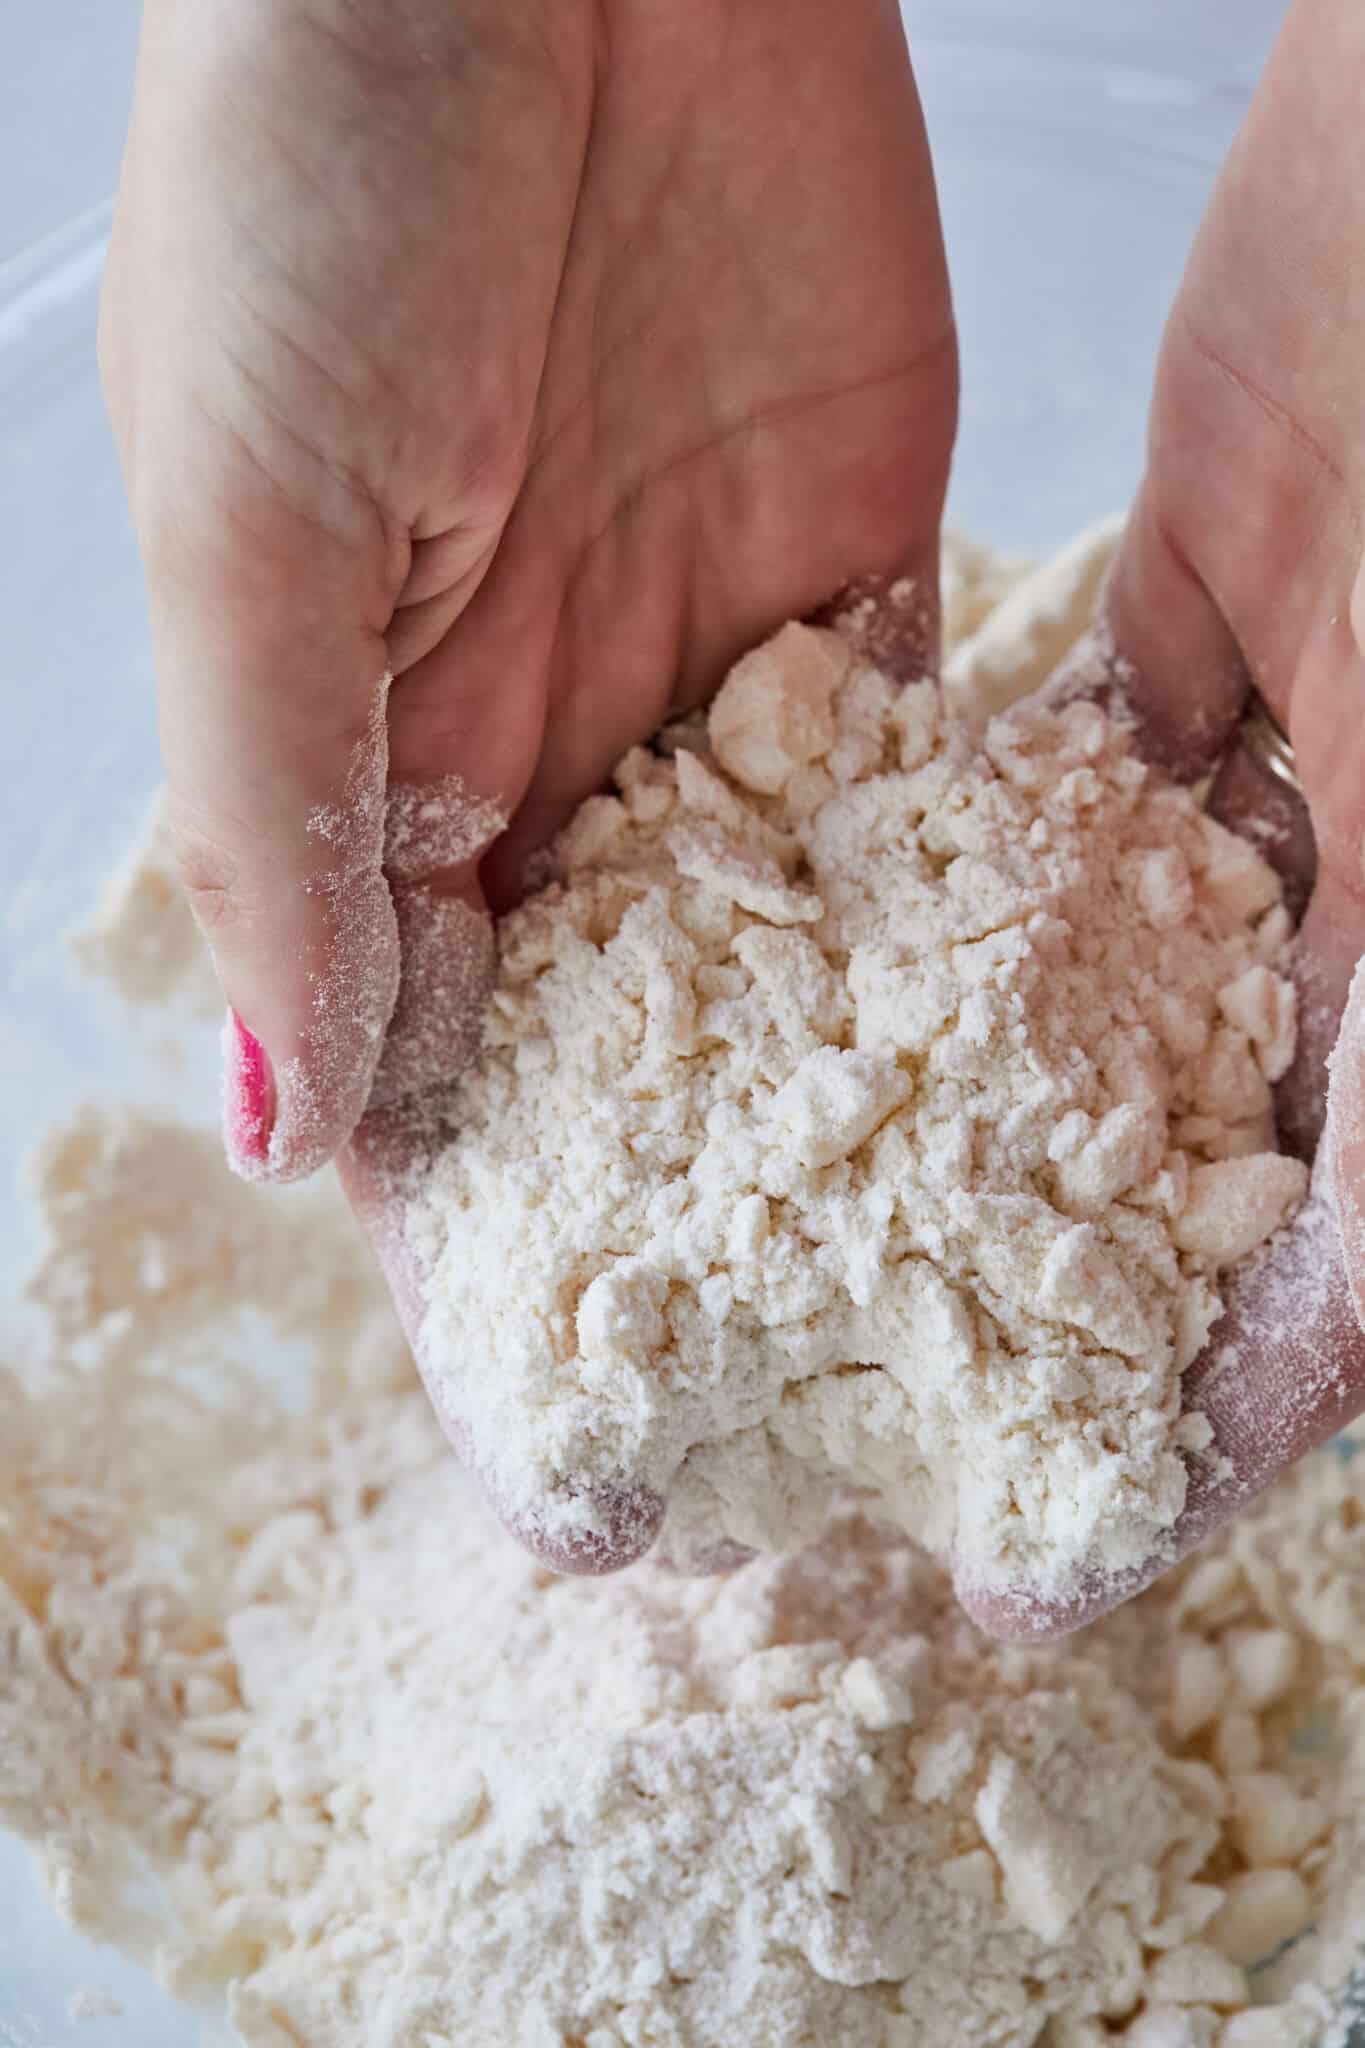 Step-by-sep instruction on how to make a flaky sour cream pie crust: rub cold butter into flour until the mixture resembles coarse bread crumb.